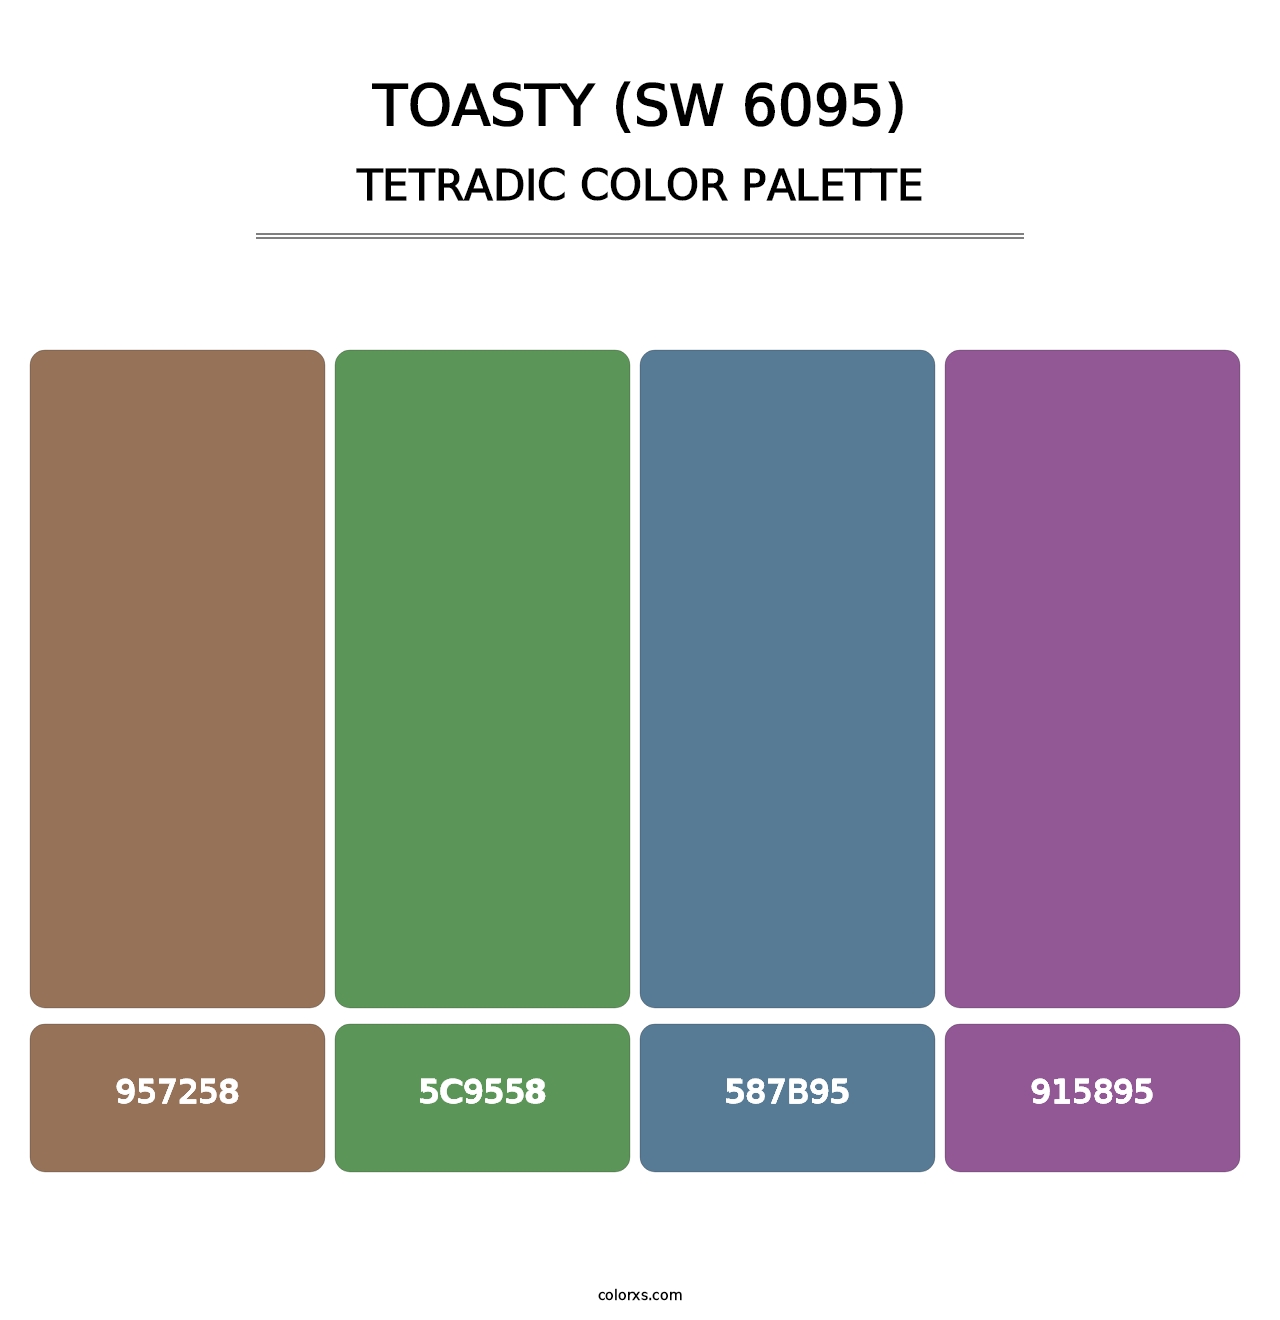 Toasty (SW 6095) - Tetradic Color Palette